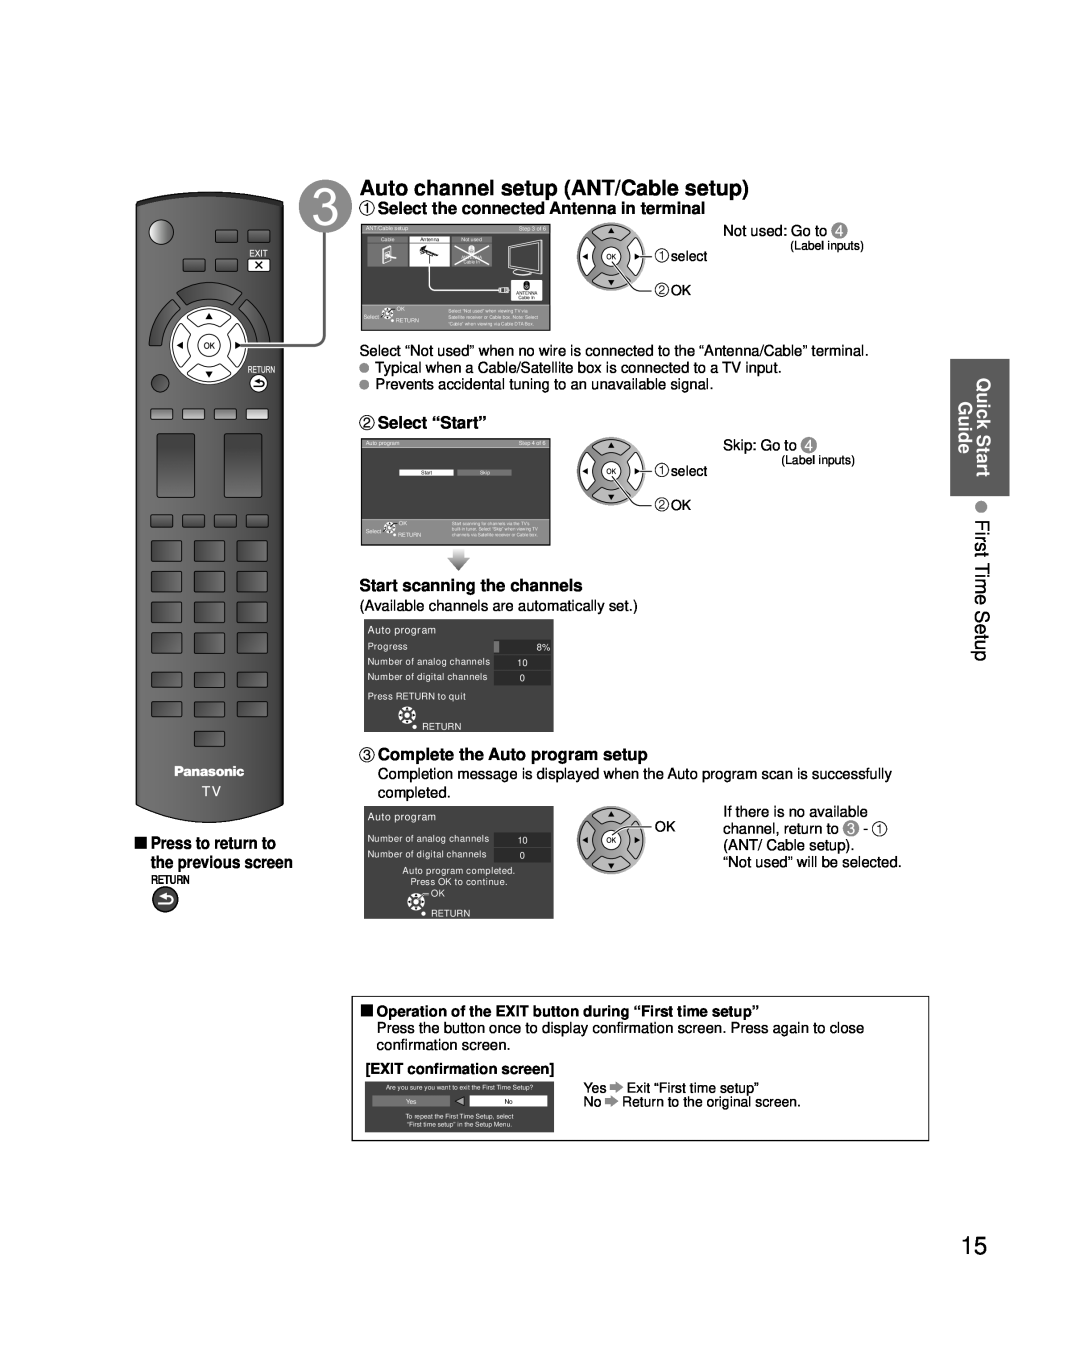 Panasonic TC-P50U2 Auto channel setup ANT/Cable setup, Time Setup, Start First, Select the connected Antenna in terminal 